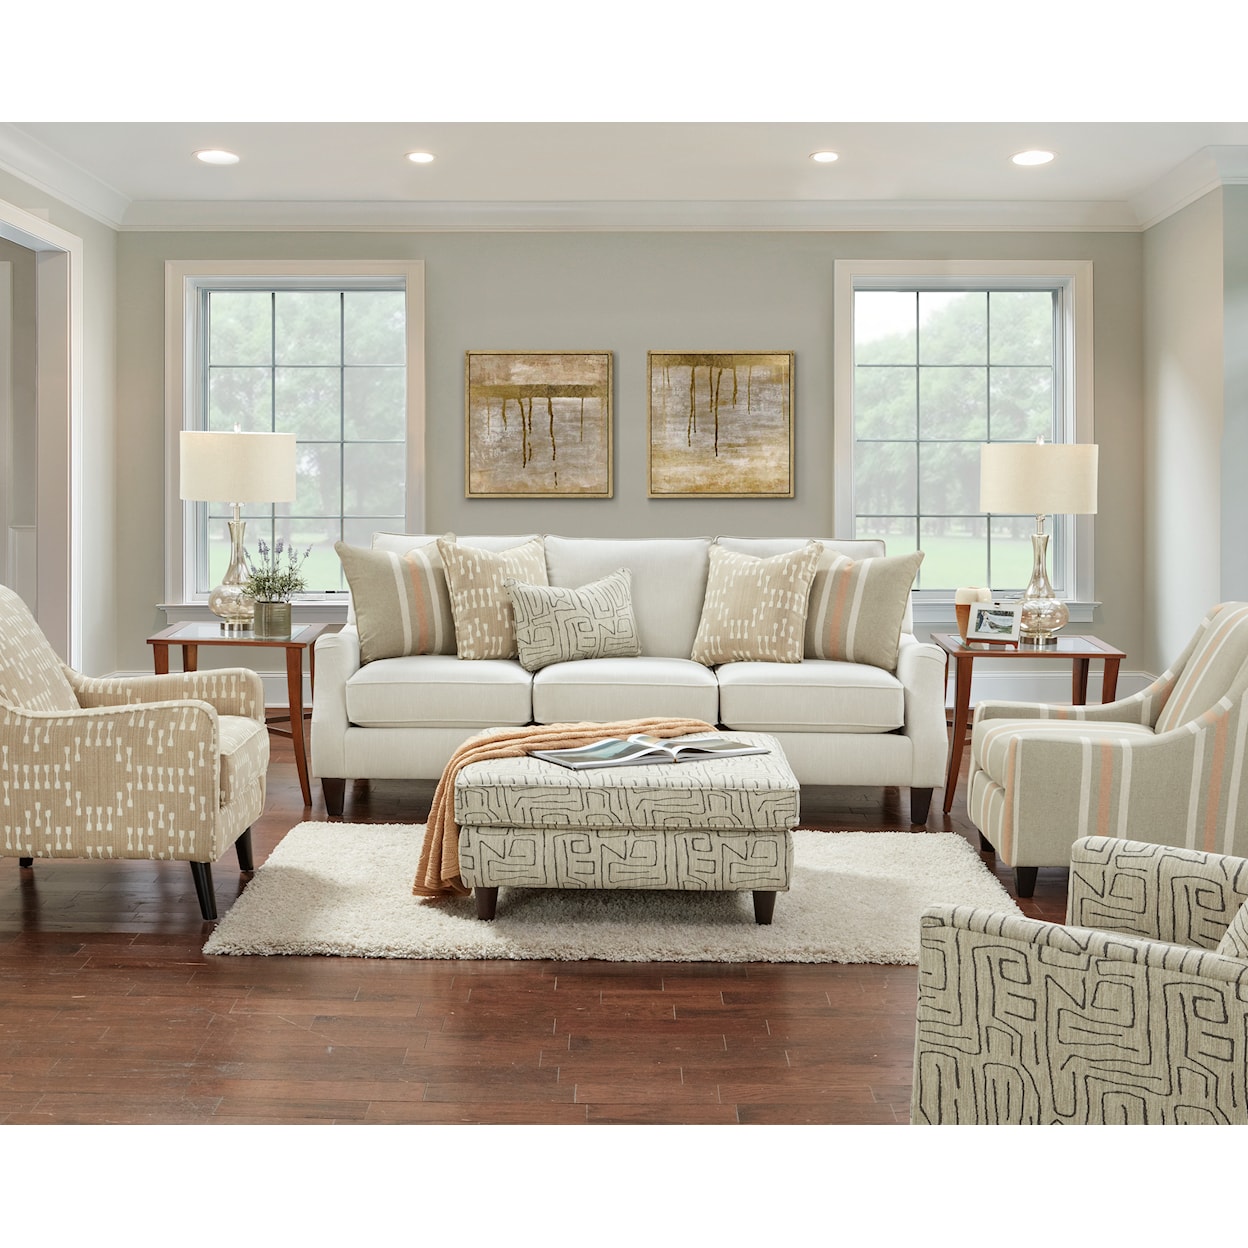 Fusion Furniture 7000 CHARLOTTE PARCHMENT Living Room Group